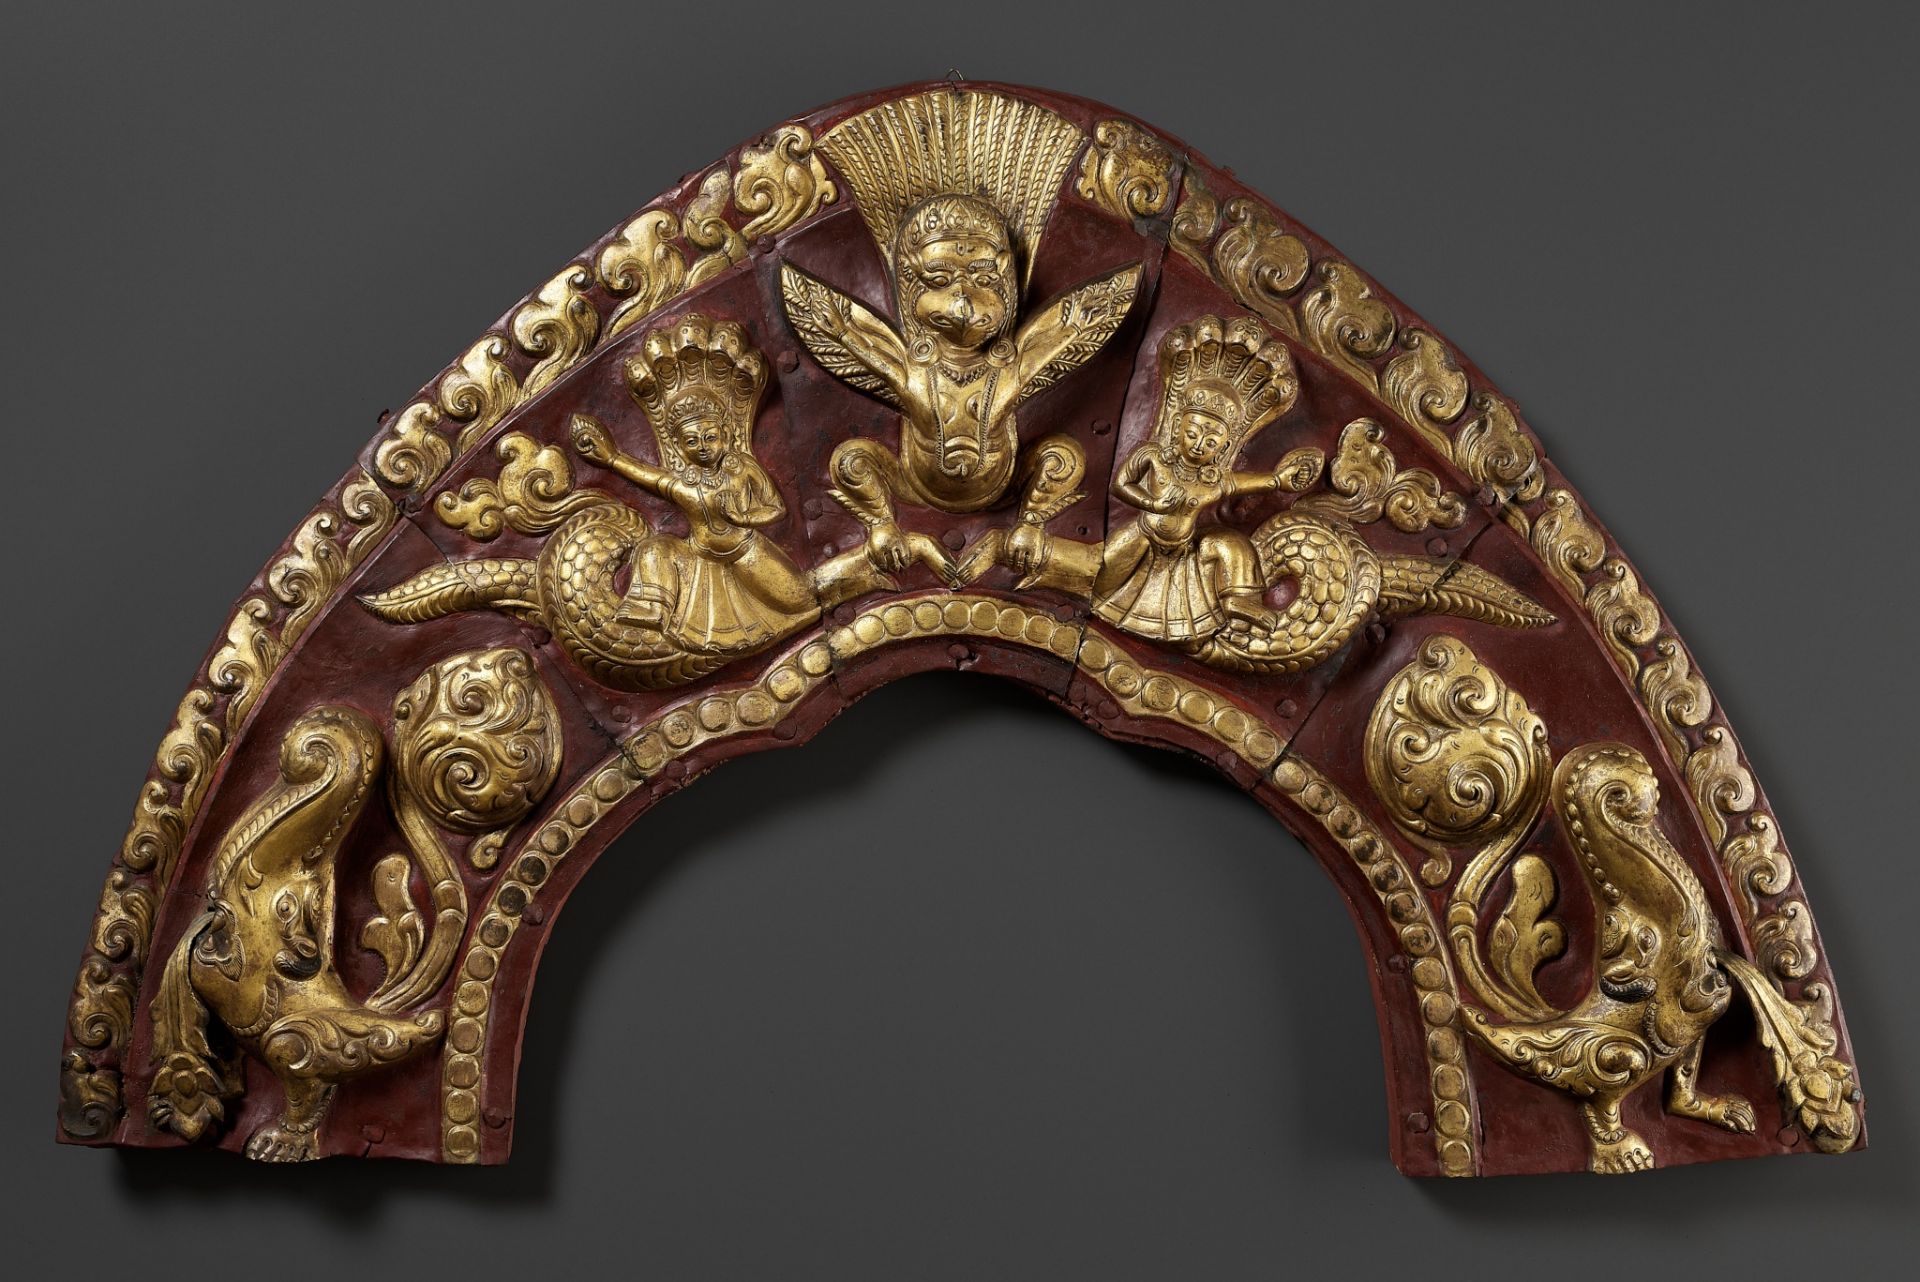 A LARGE GILT AND LACQUERED COPPER REPOUSSE TORANA, NEPAL, 17TH-18TH CENTURY